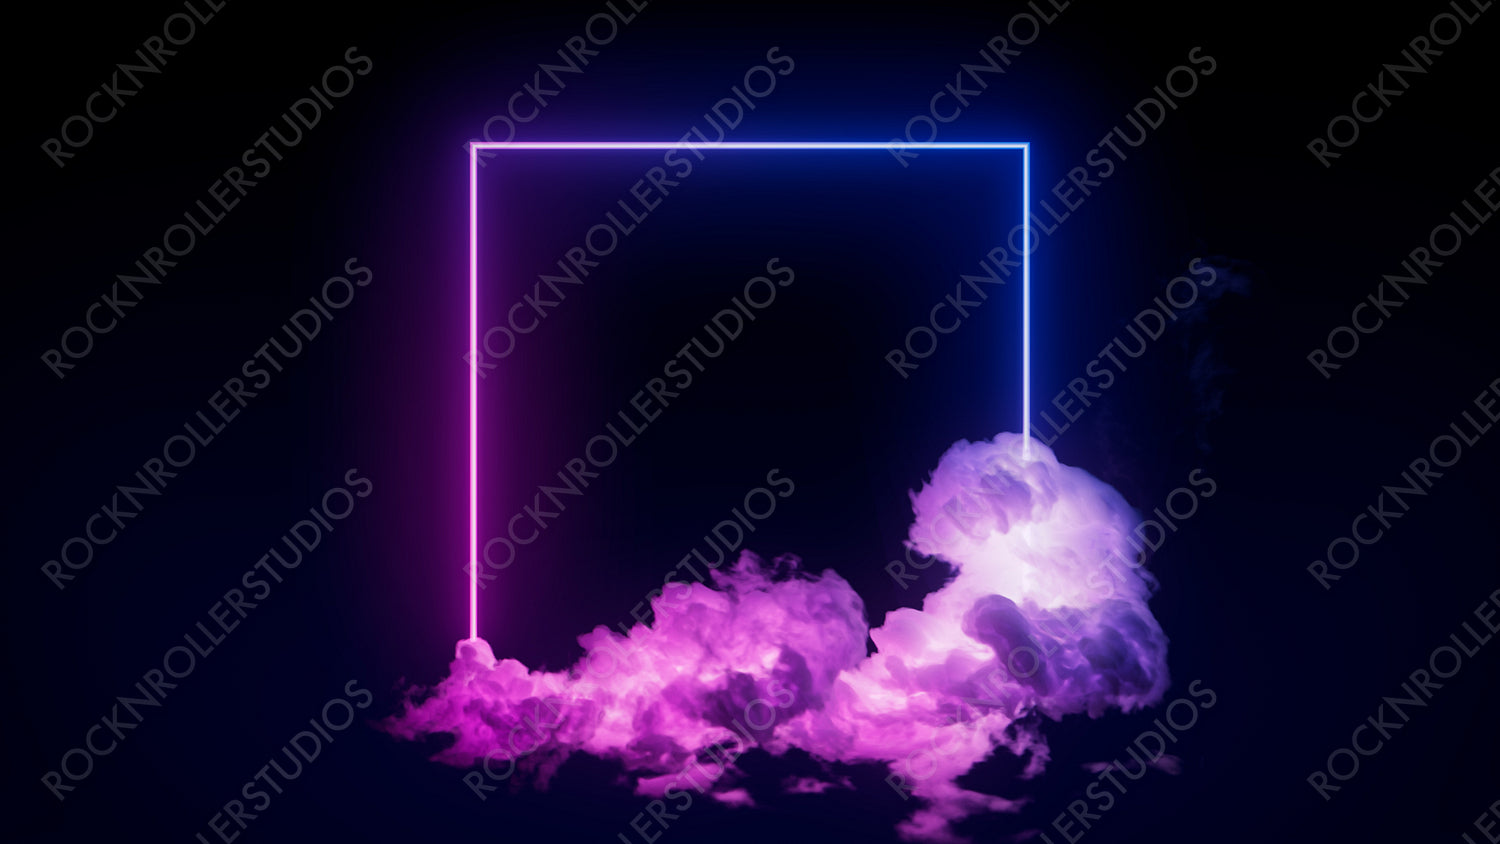 Pink and Blue Neon Light with Cloud Formation. Square shaped Fluorescent Frame in Dark Environment.